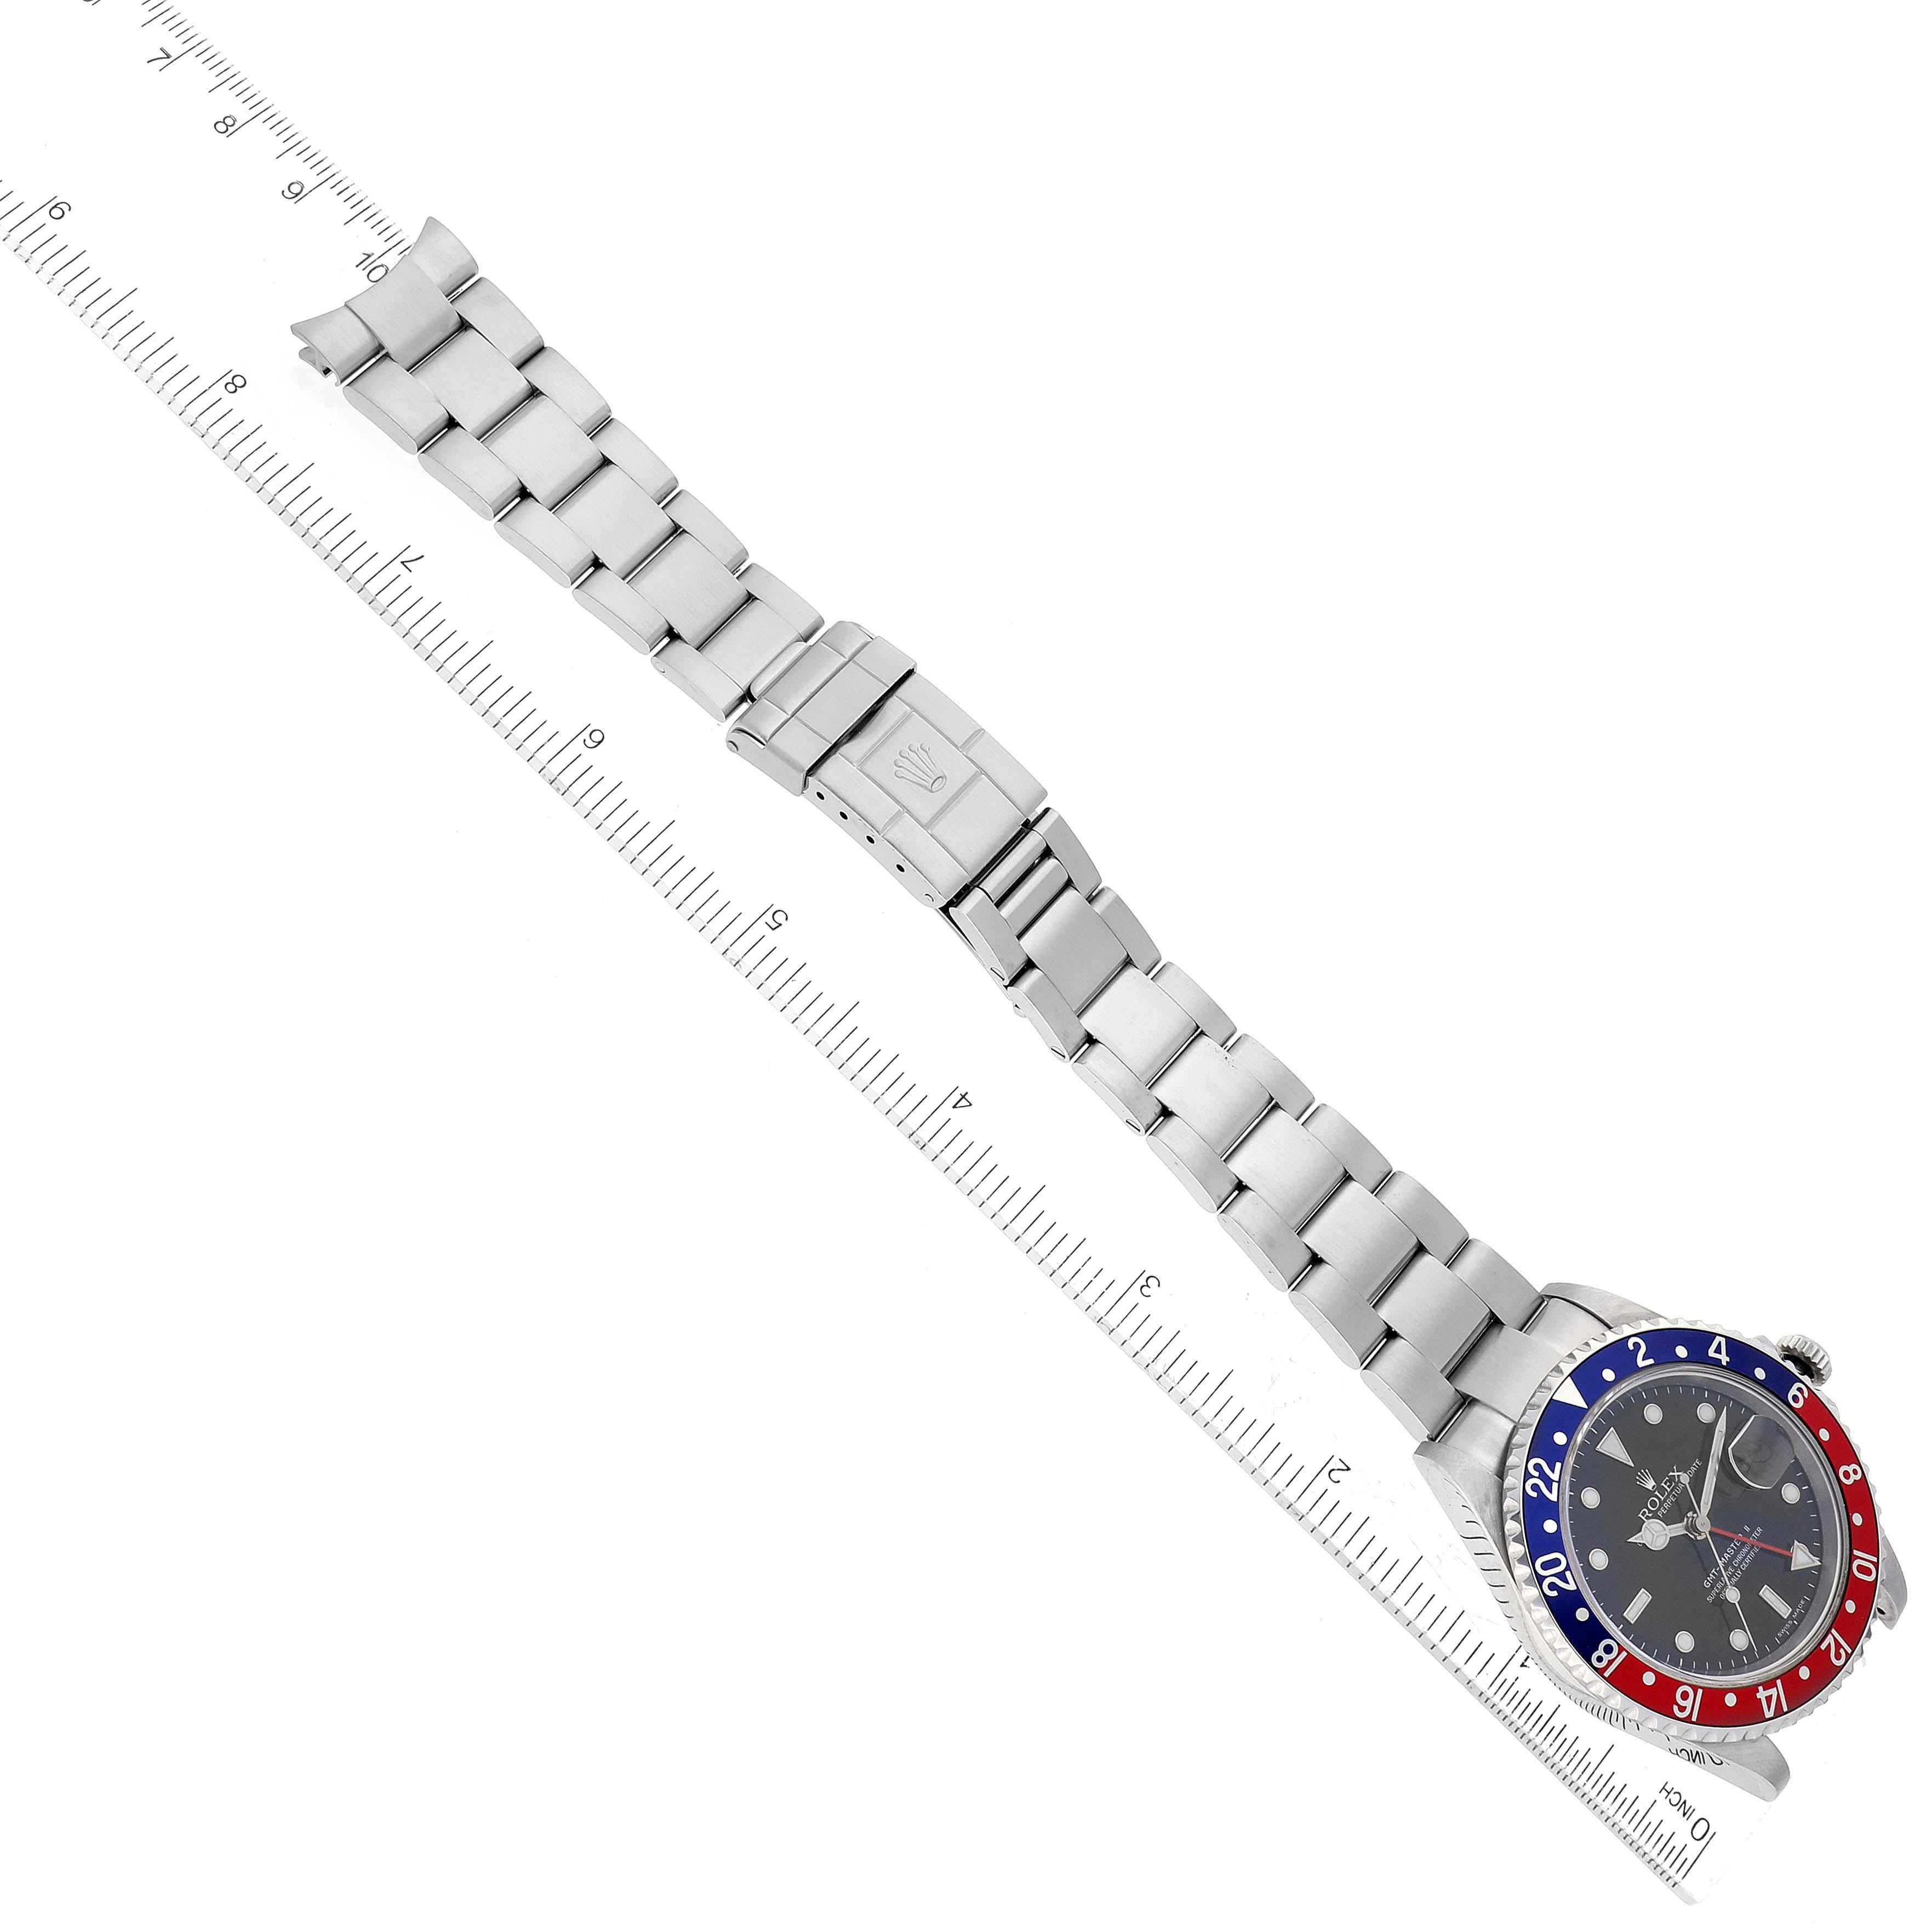 Rolex GMT Master II Blue Red Pepsi Error Dial Steel Mens Watch 16710 Box Papers 6